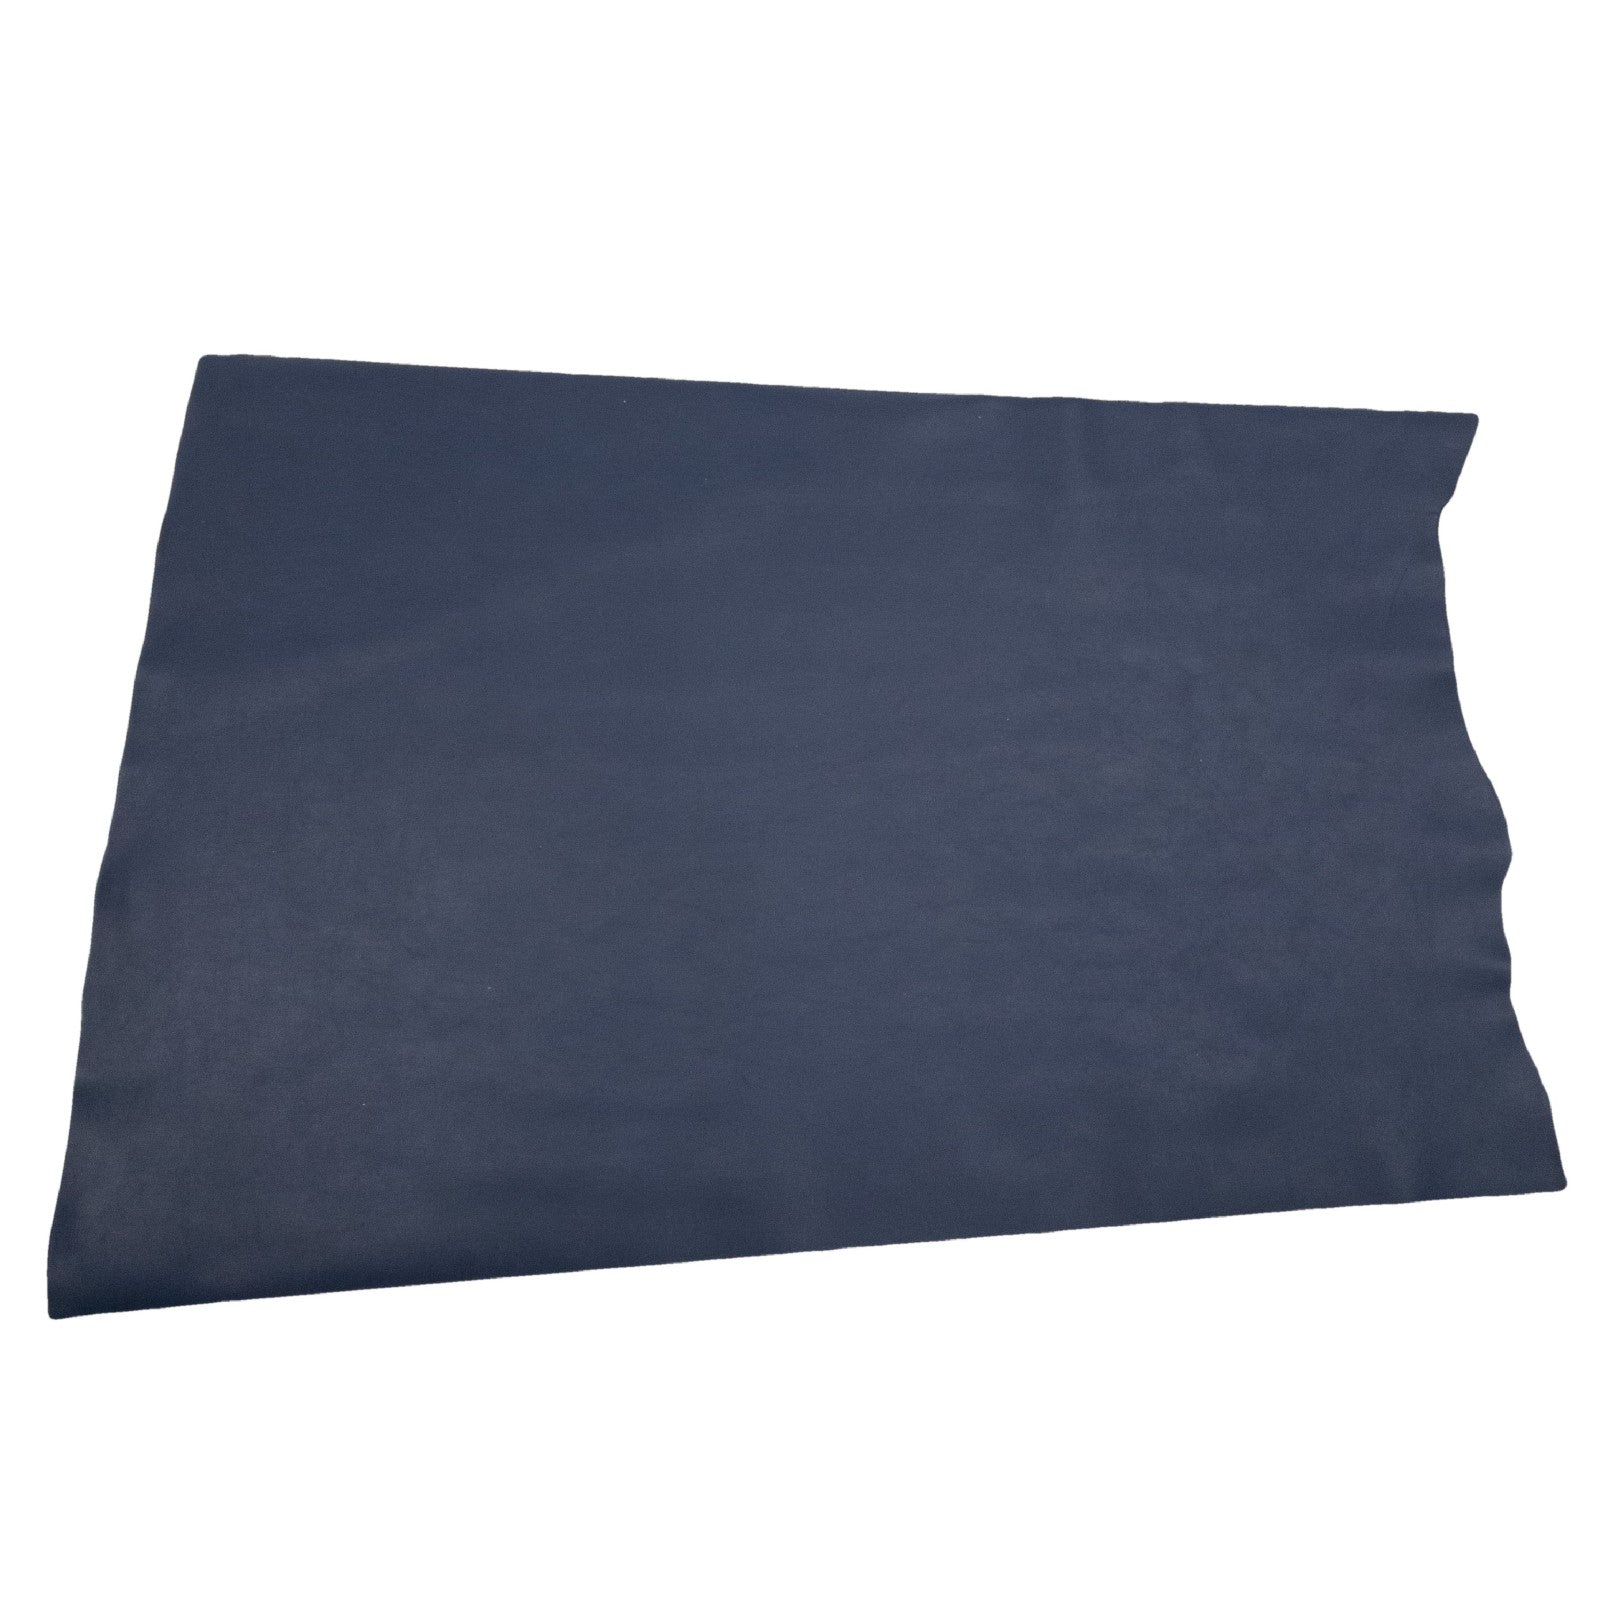 Da Bears Navy Blue, 3-3.5 oz Cow Hides, Starting Lineup, Middle Piece / 6.5-7.5 Sq Ft | The Leather Guy